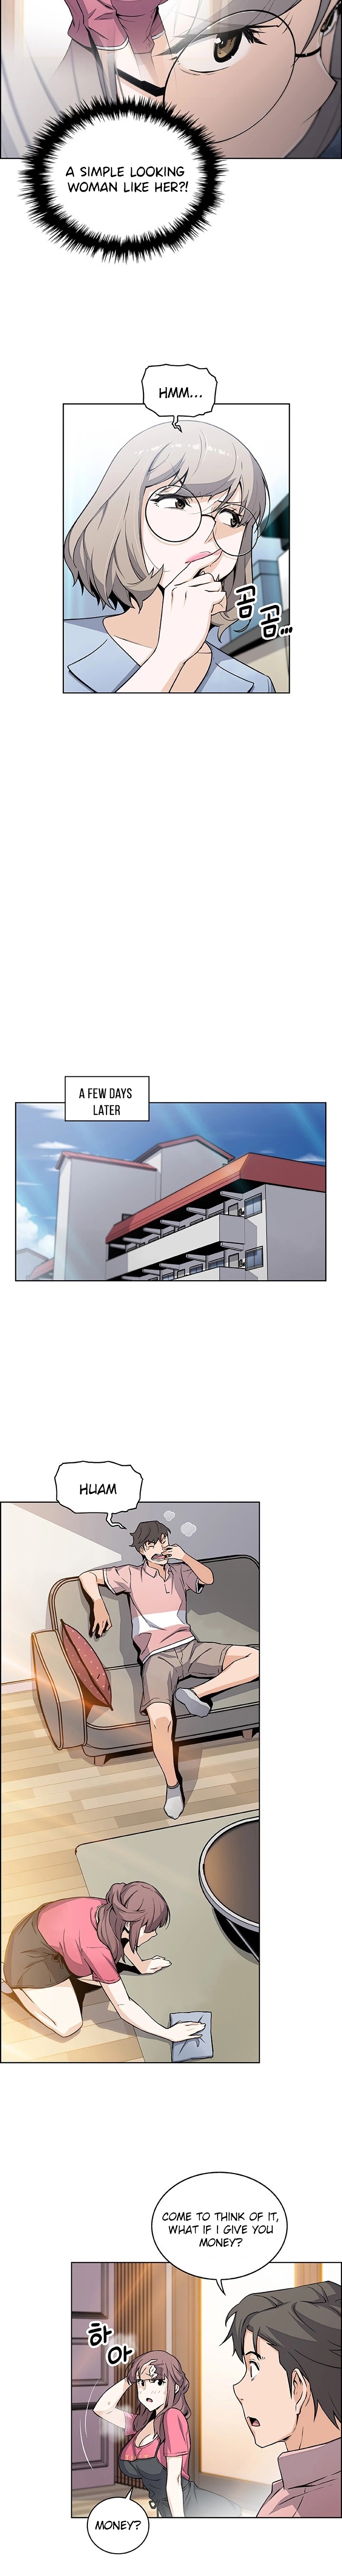 Housekeeper Manhwa - Chapter 30 Page 10